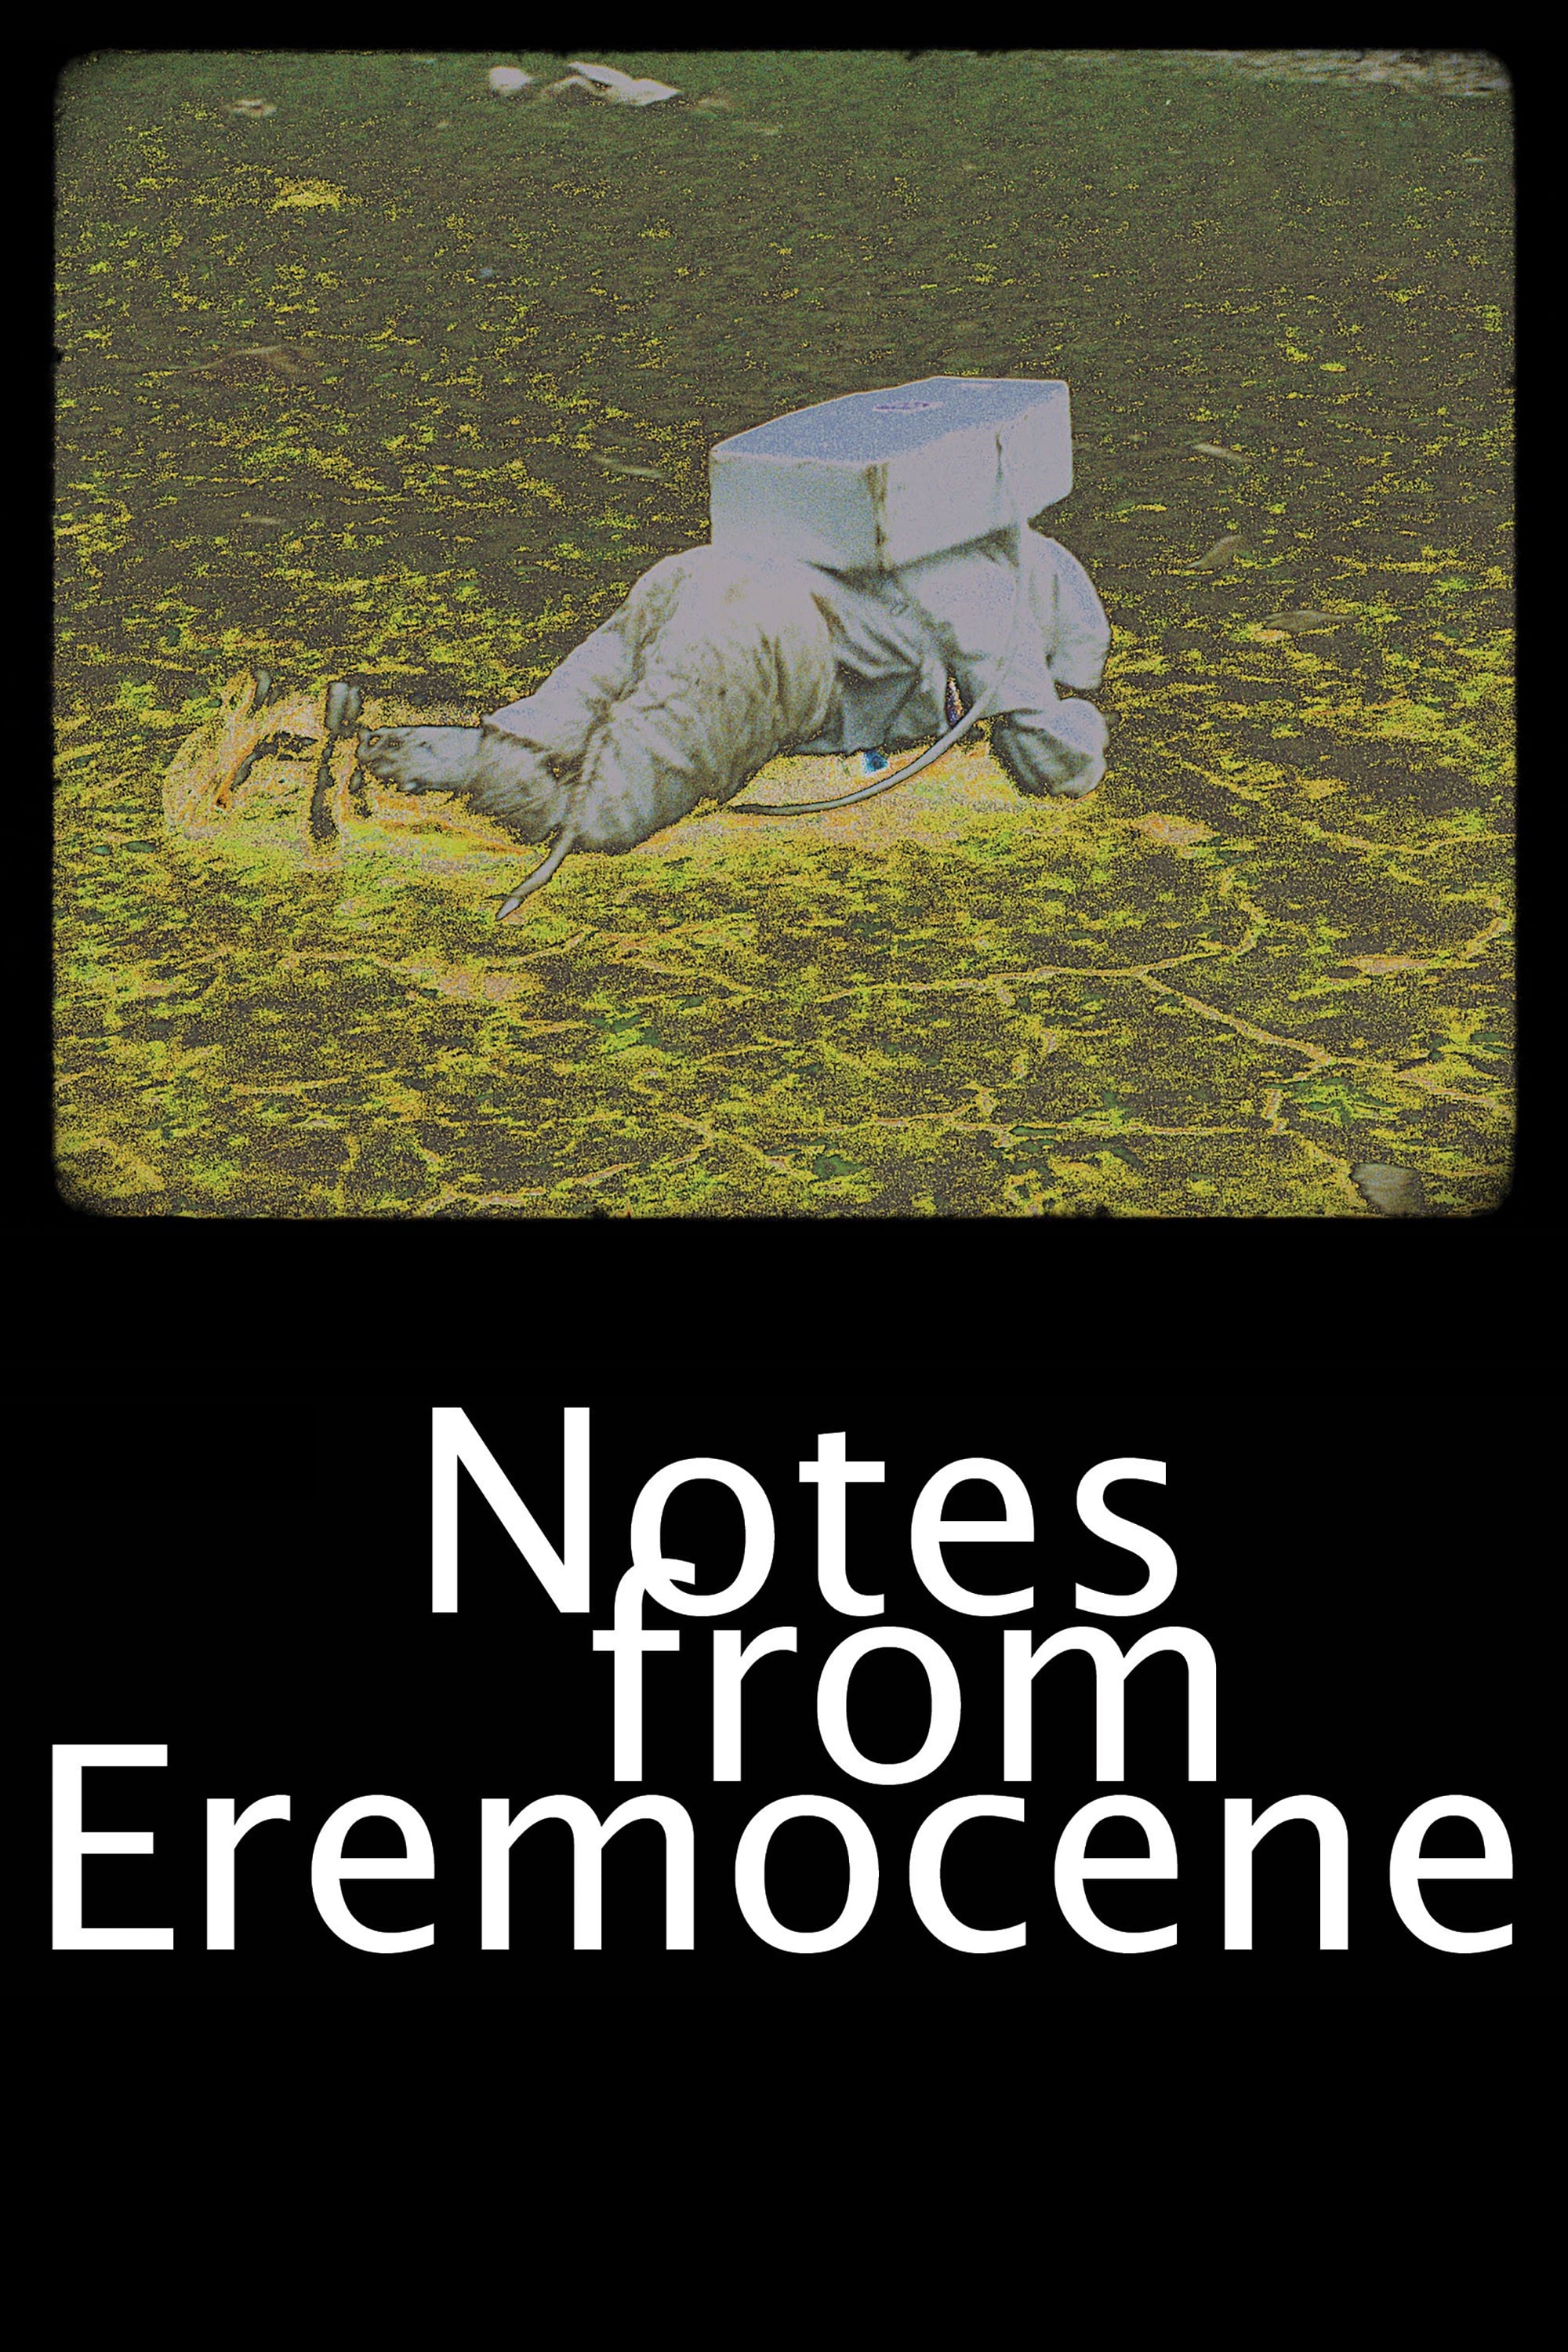 Notes from Eremocene